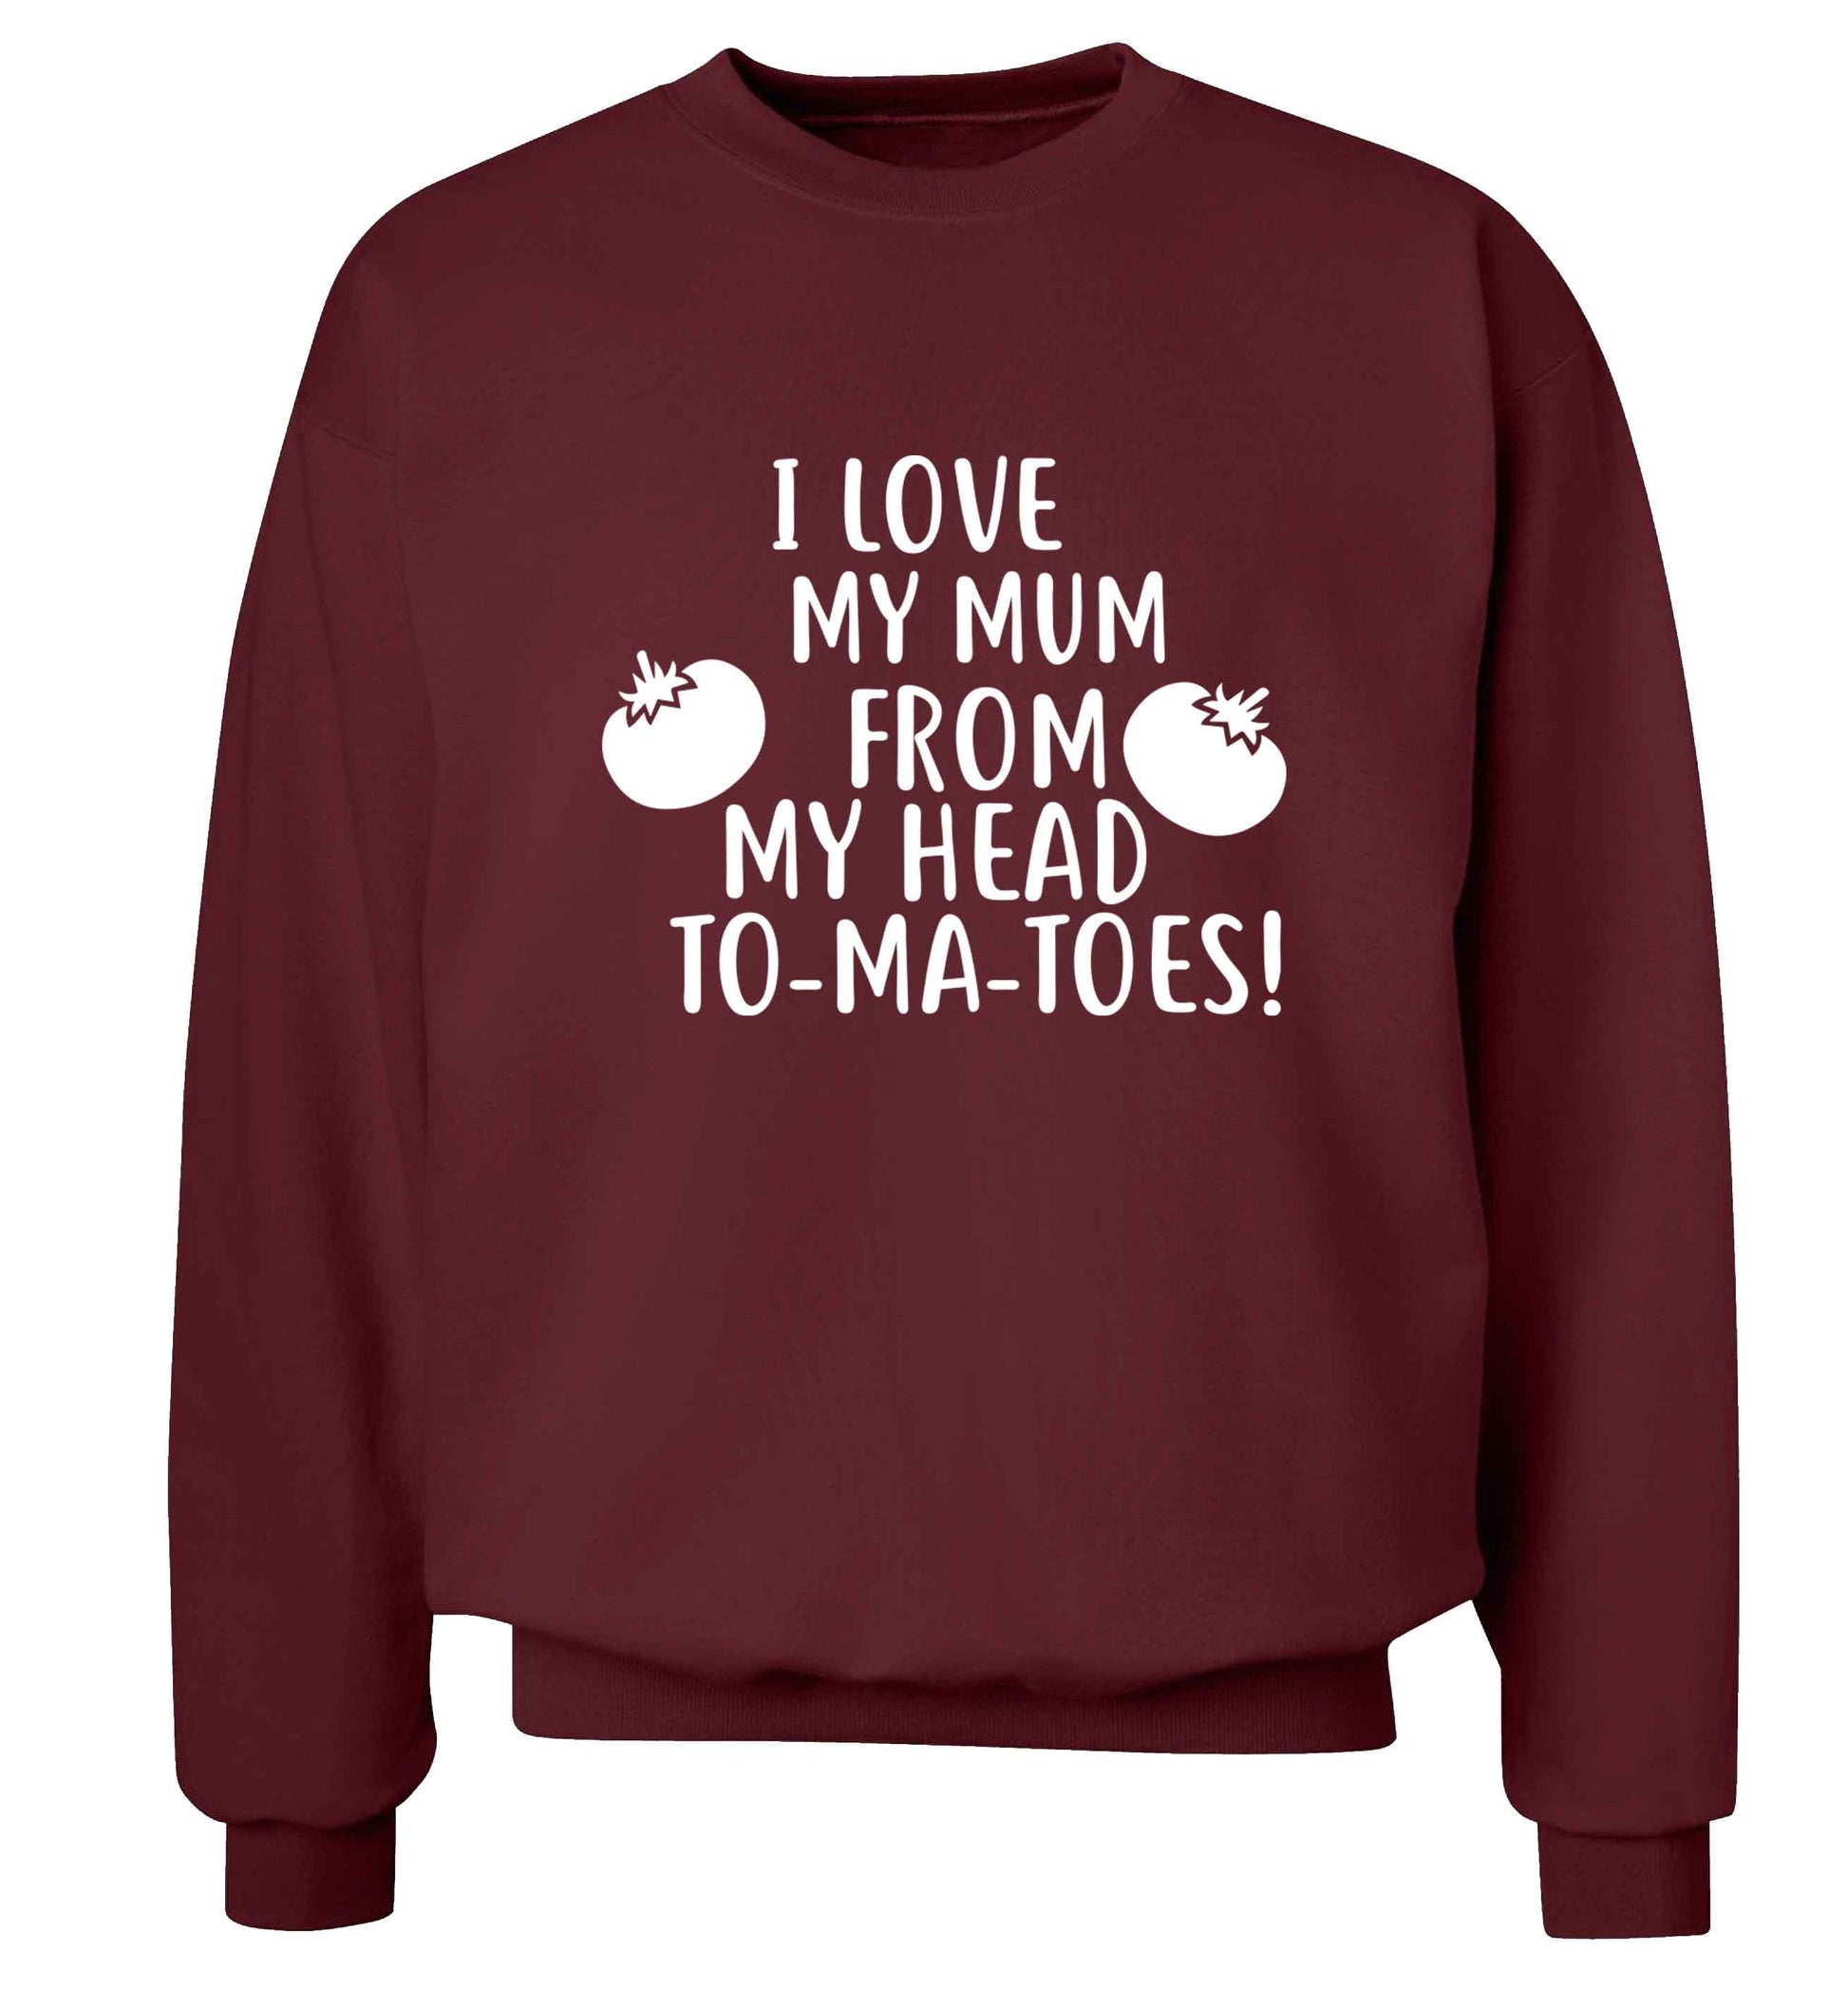 I love my mum from my head to-my-toes! adult's unisex maroon sweater 2XL